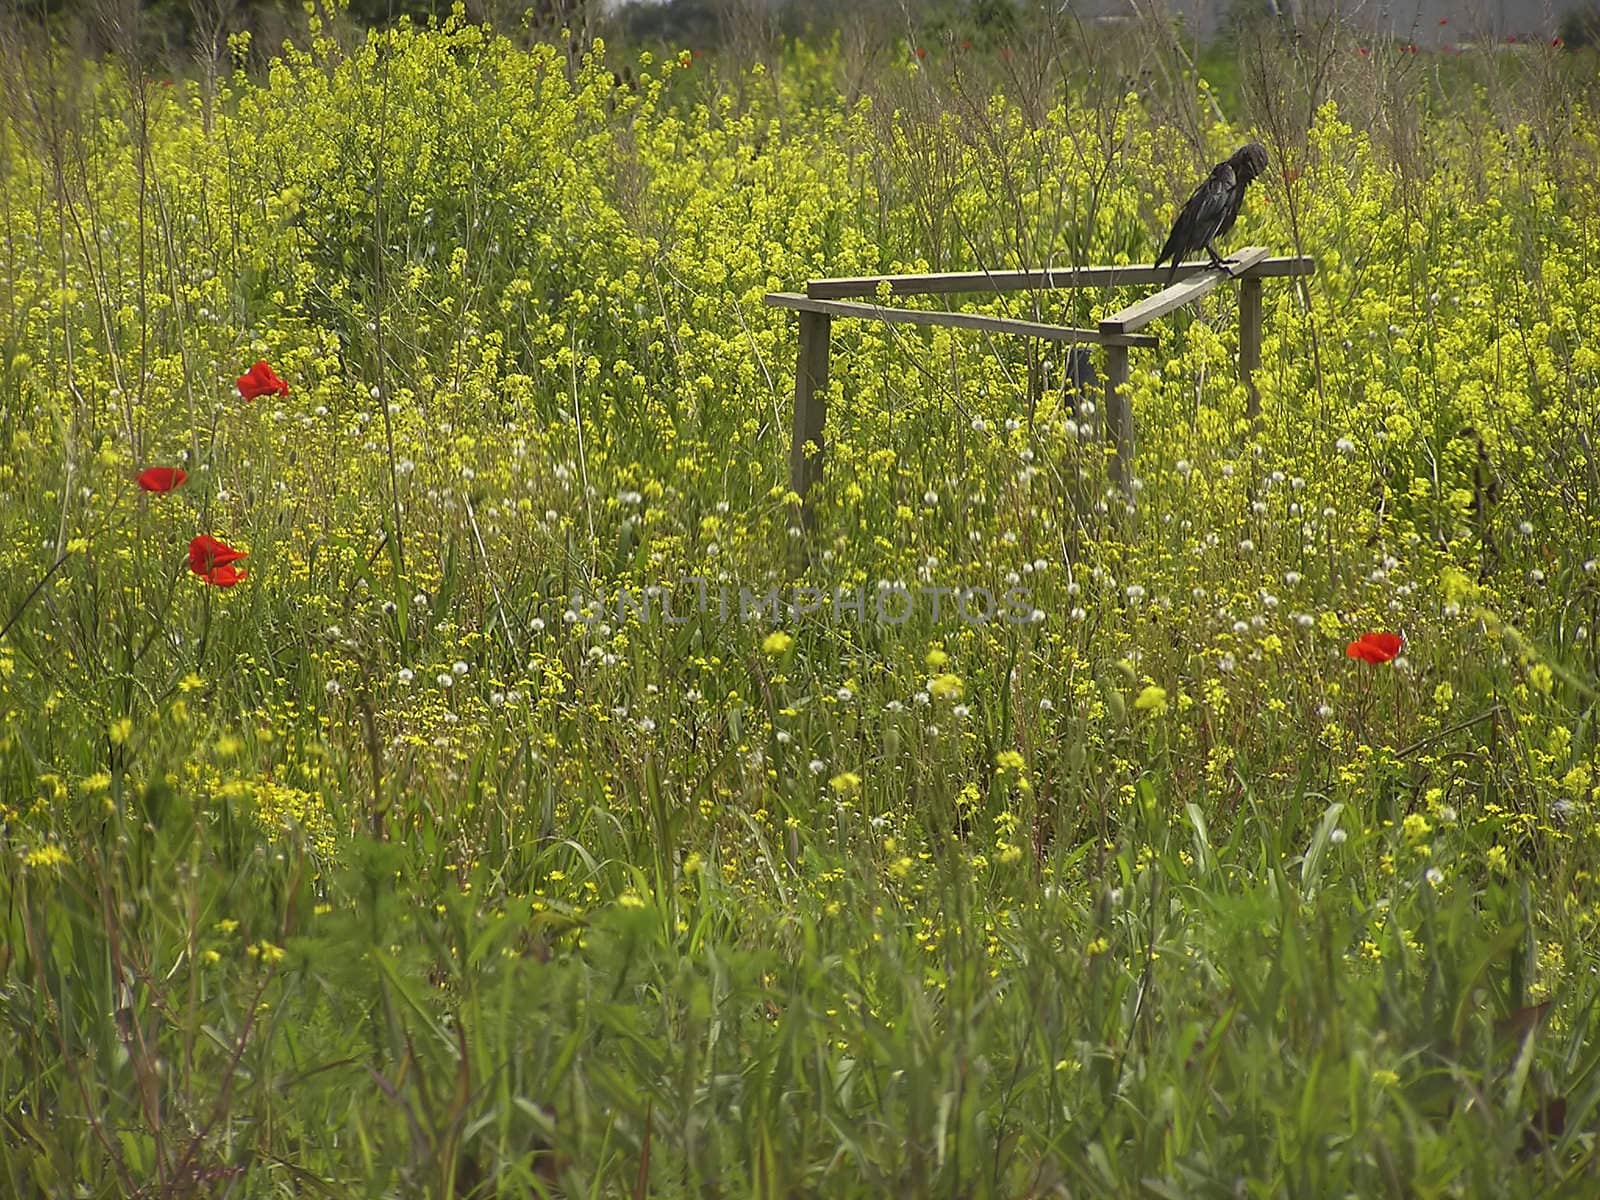 Crow standing in rapeseed field with few poppies.